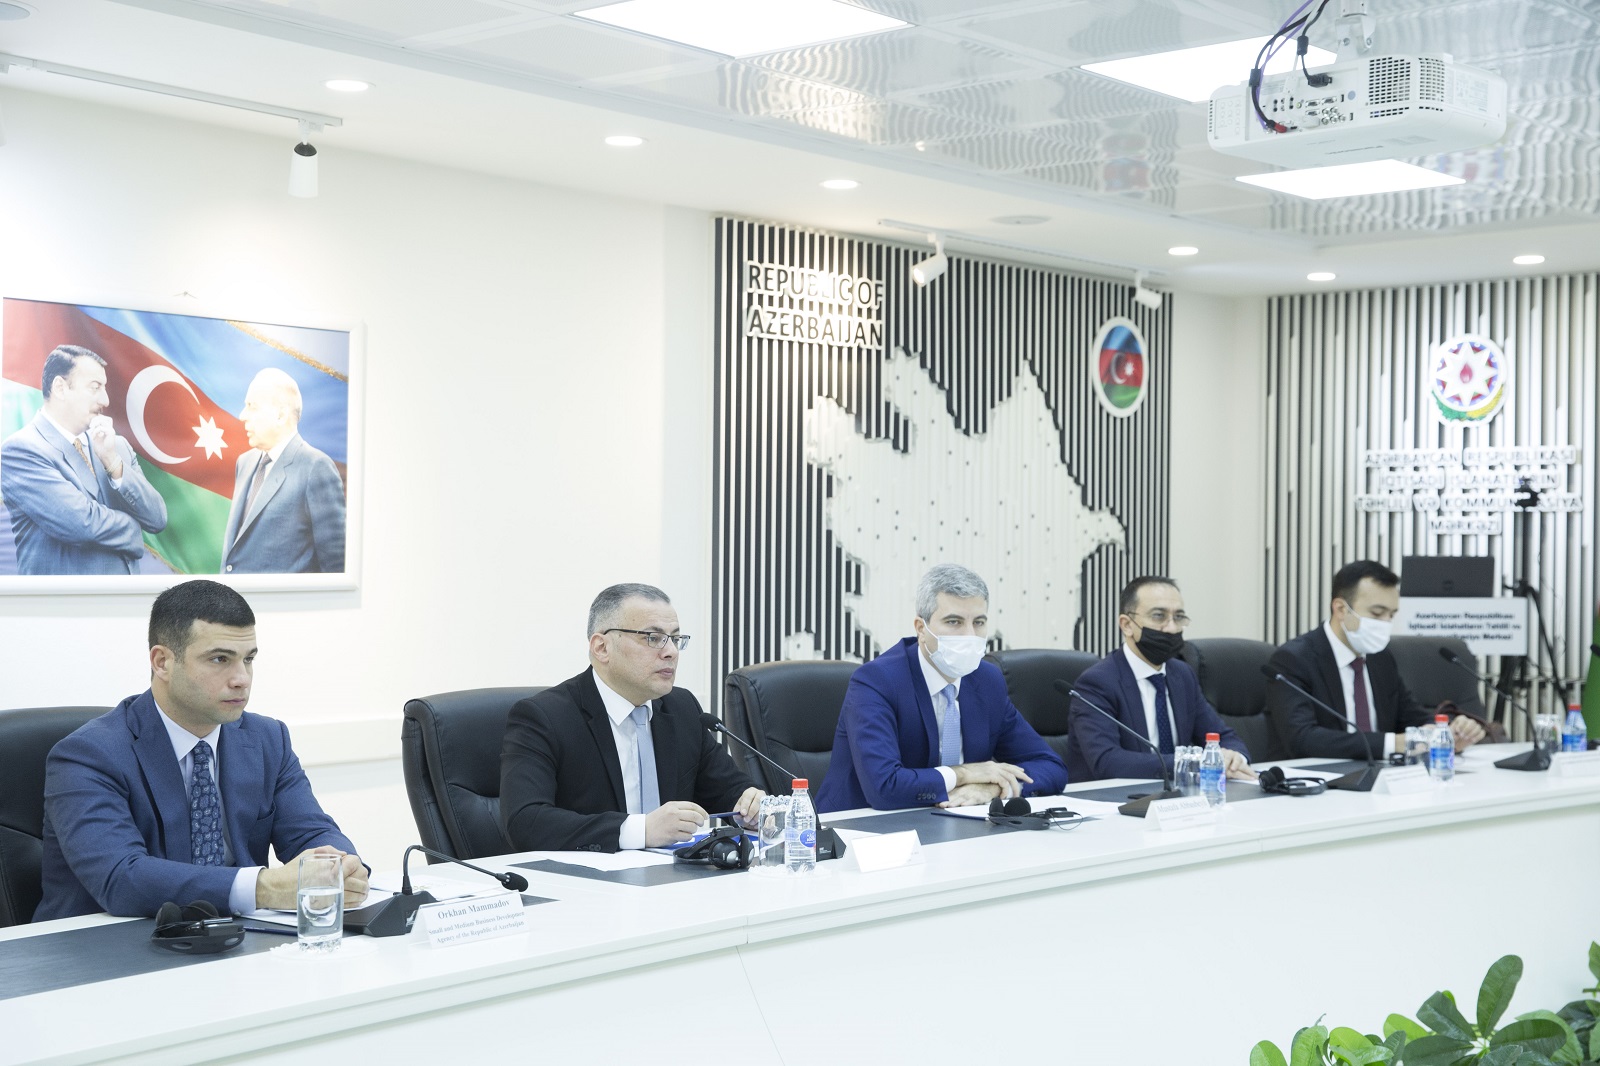 An event on "Labor market challenges and vision for the future in Azerbaijan" has been held